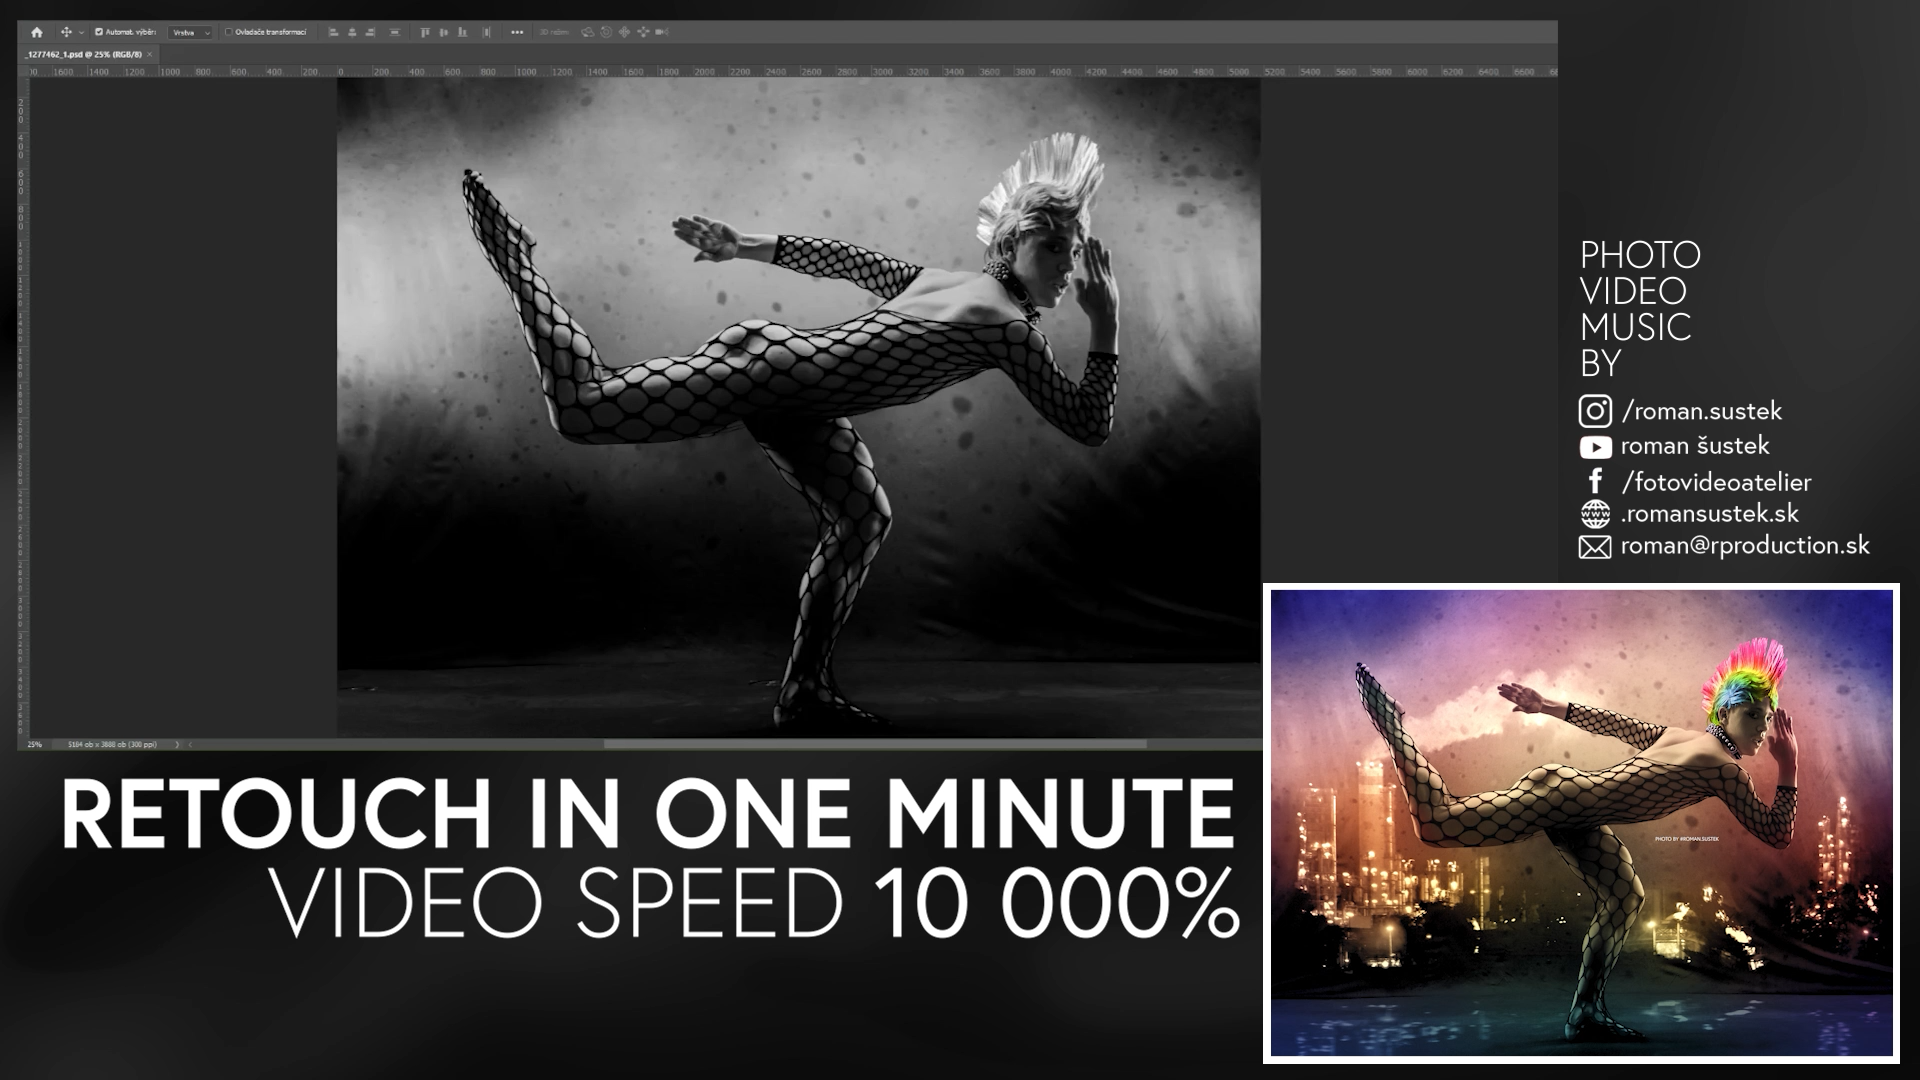 bw hand colored retouch photo with ballet dancer from Slovakia, 10 000% video speed, retouch in one minute